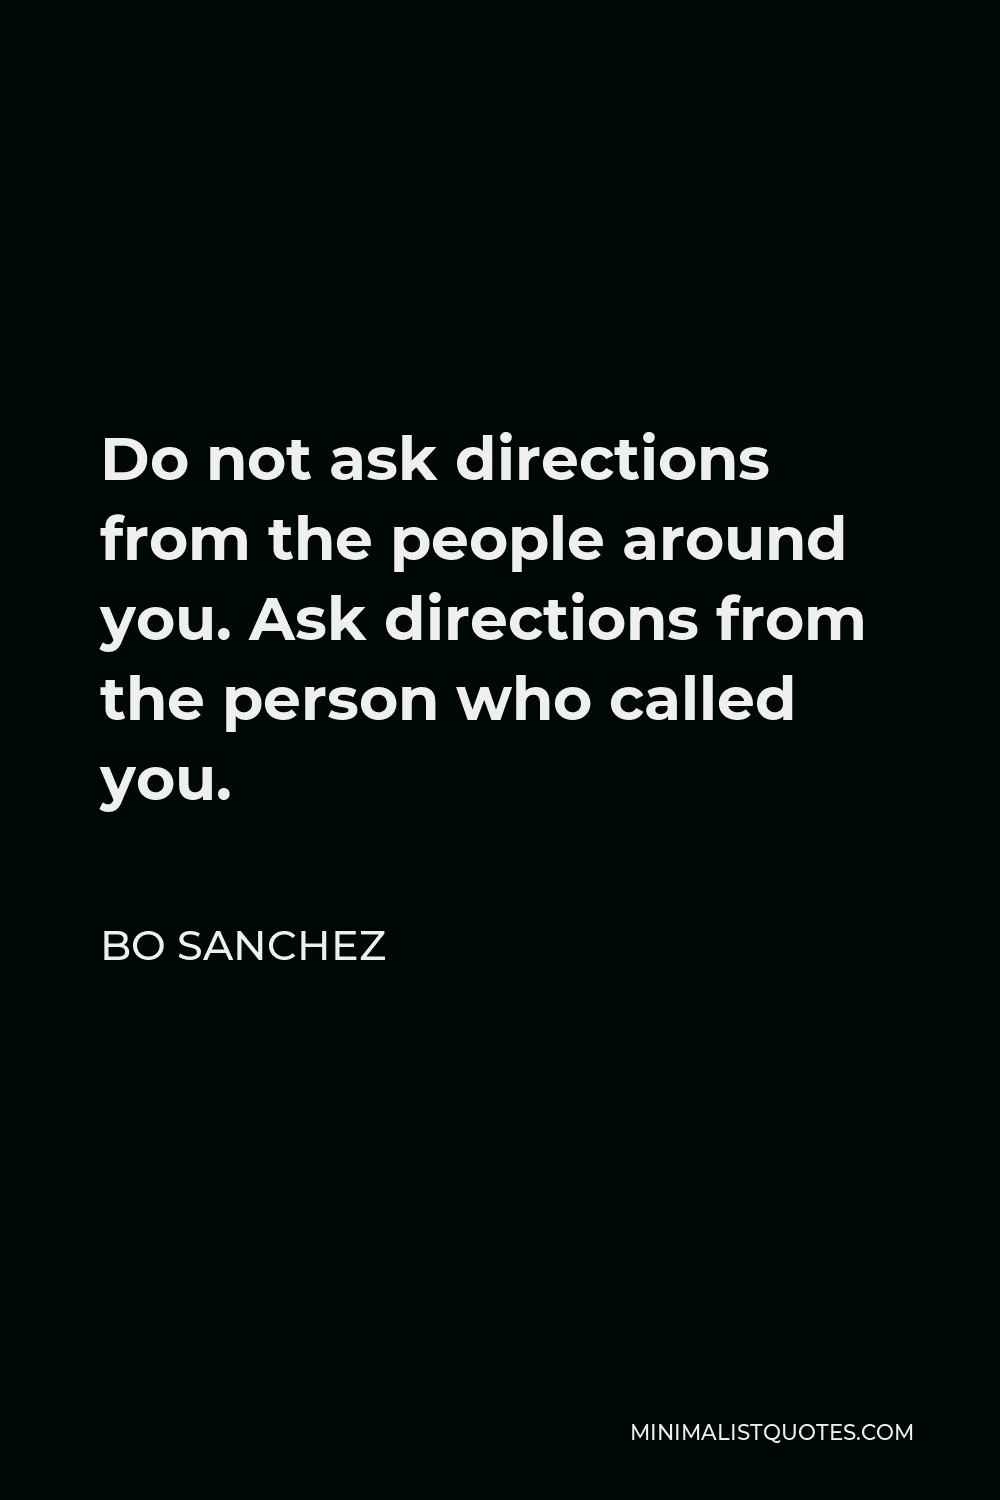 Bo Sanchez Quote - Do not ask directions from the people around you. Ask directions from the person who called you.